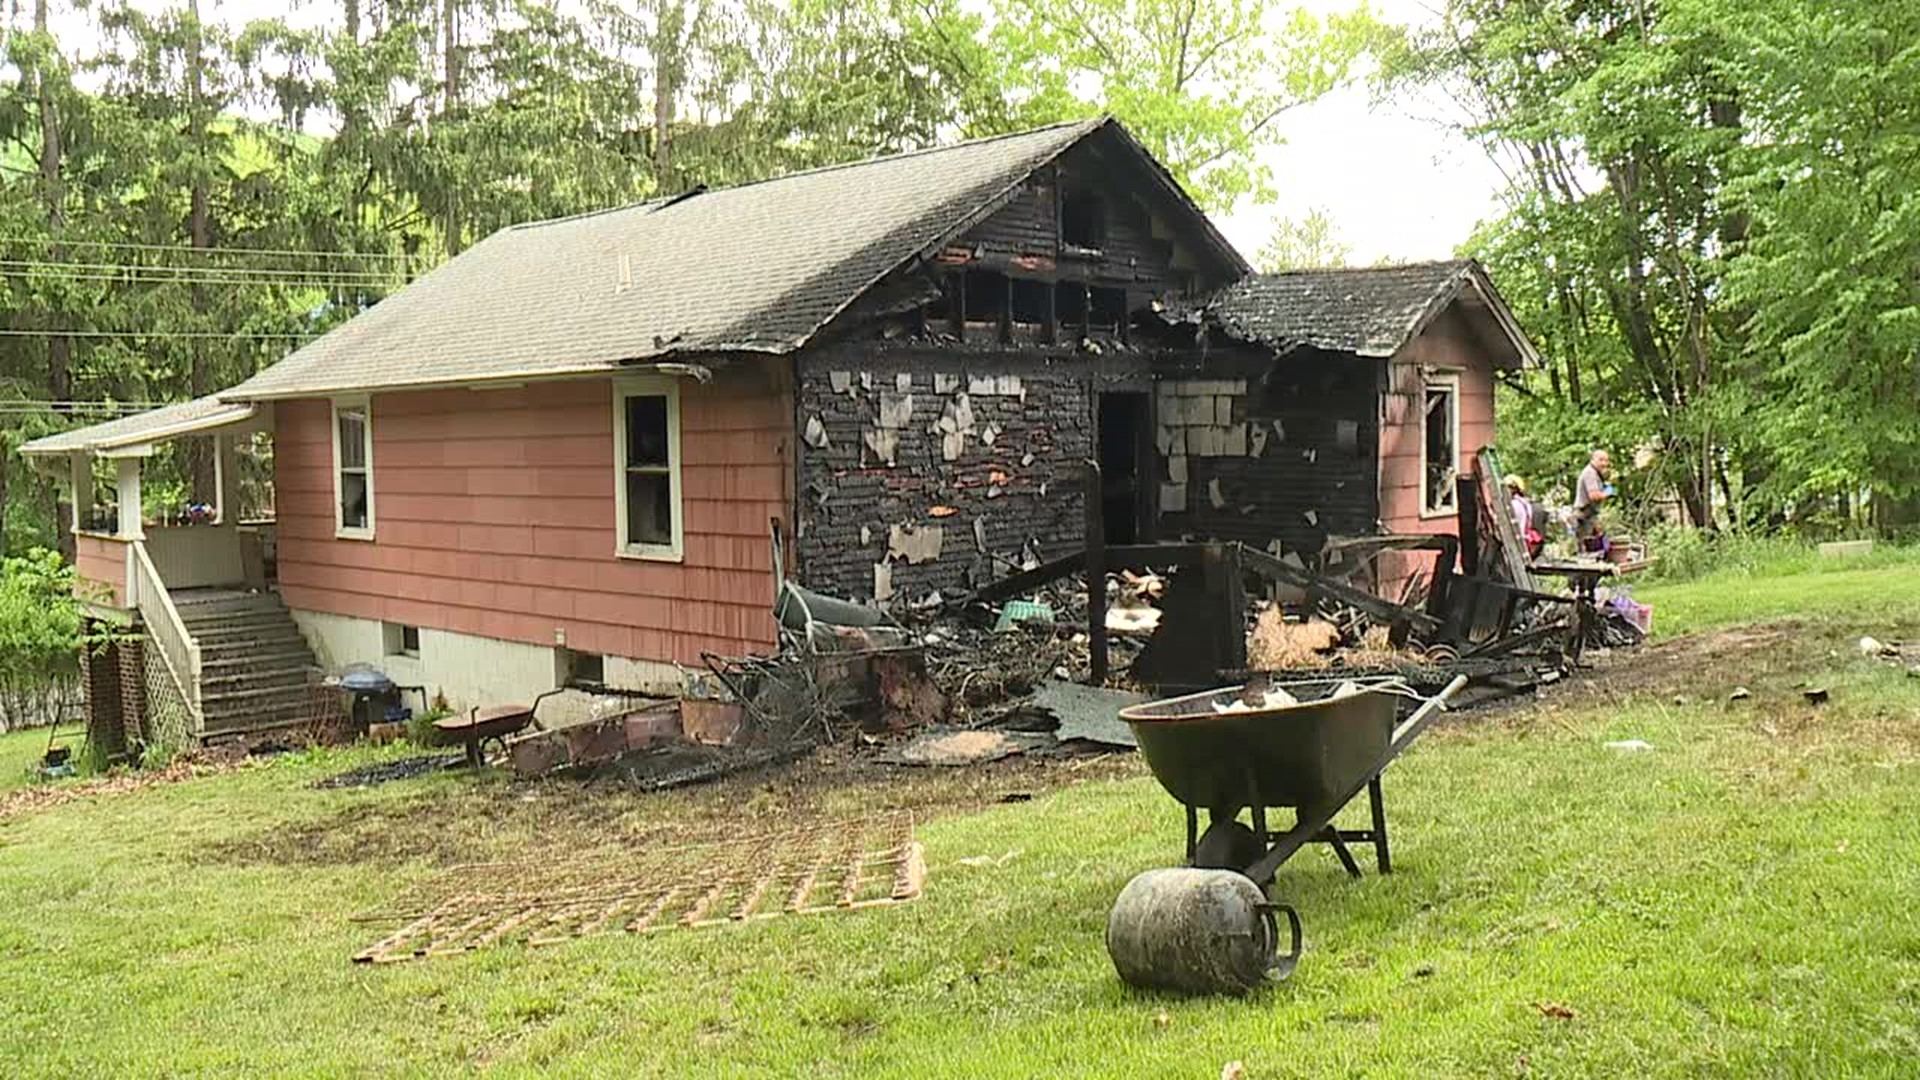 That fire sparked after 11 a.m. Tuesday in a house on Hazle Street in Black Creek Township